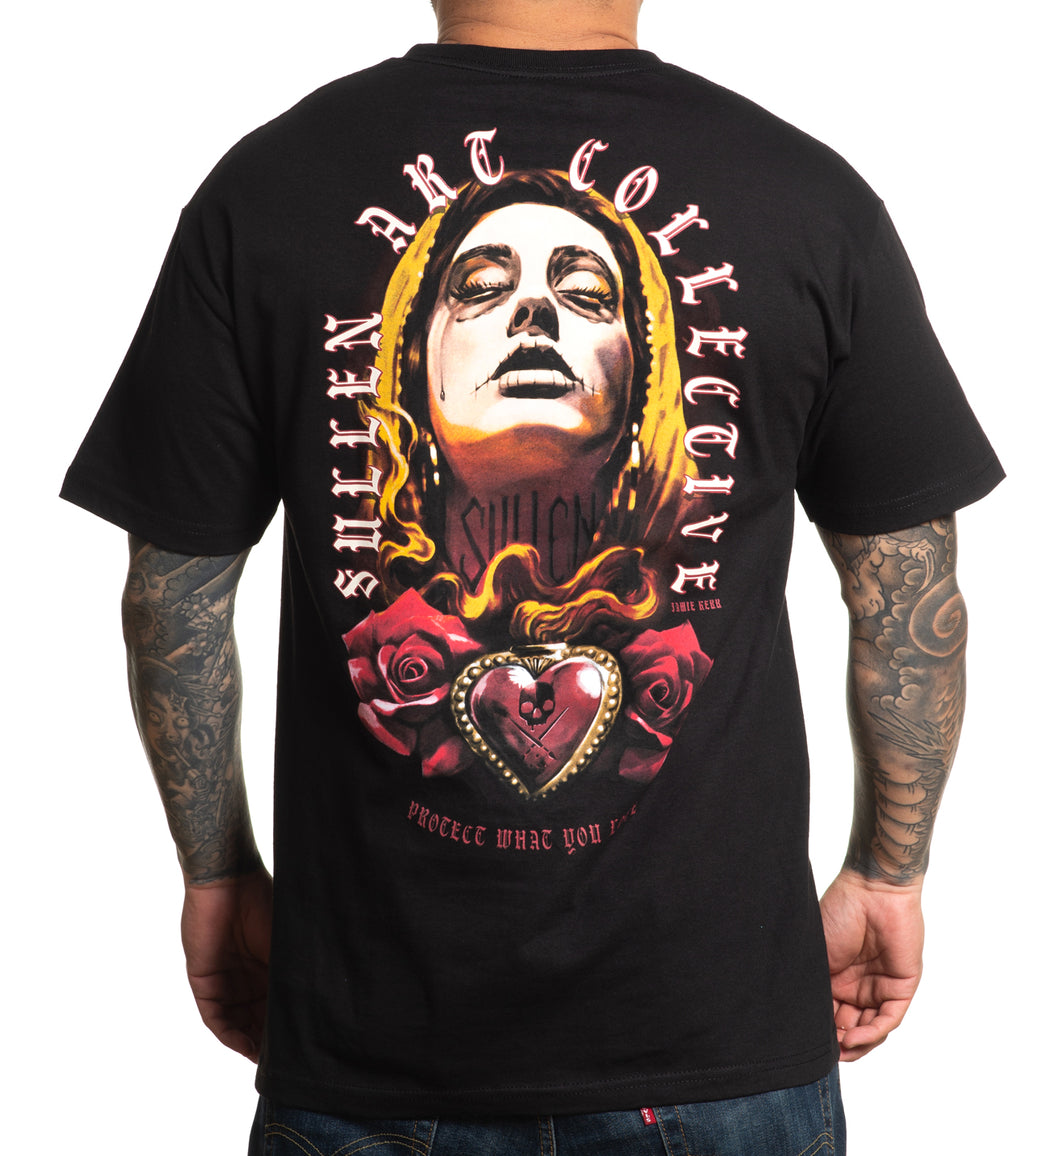 dark tshirt with gold Mary and Sacred heart and roses